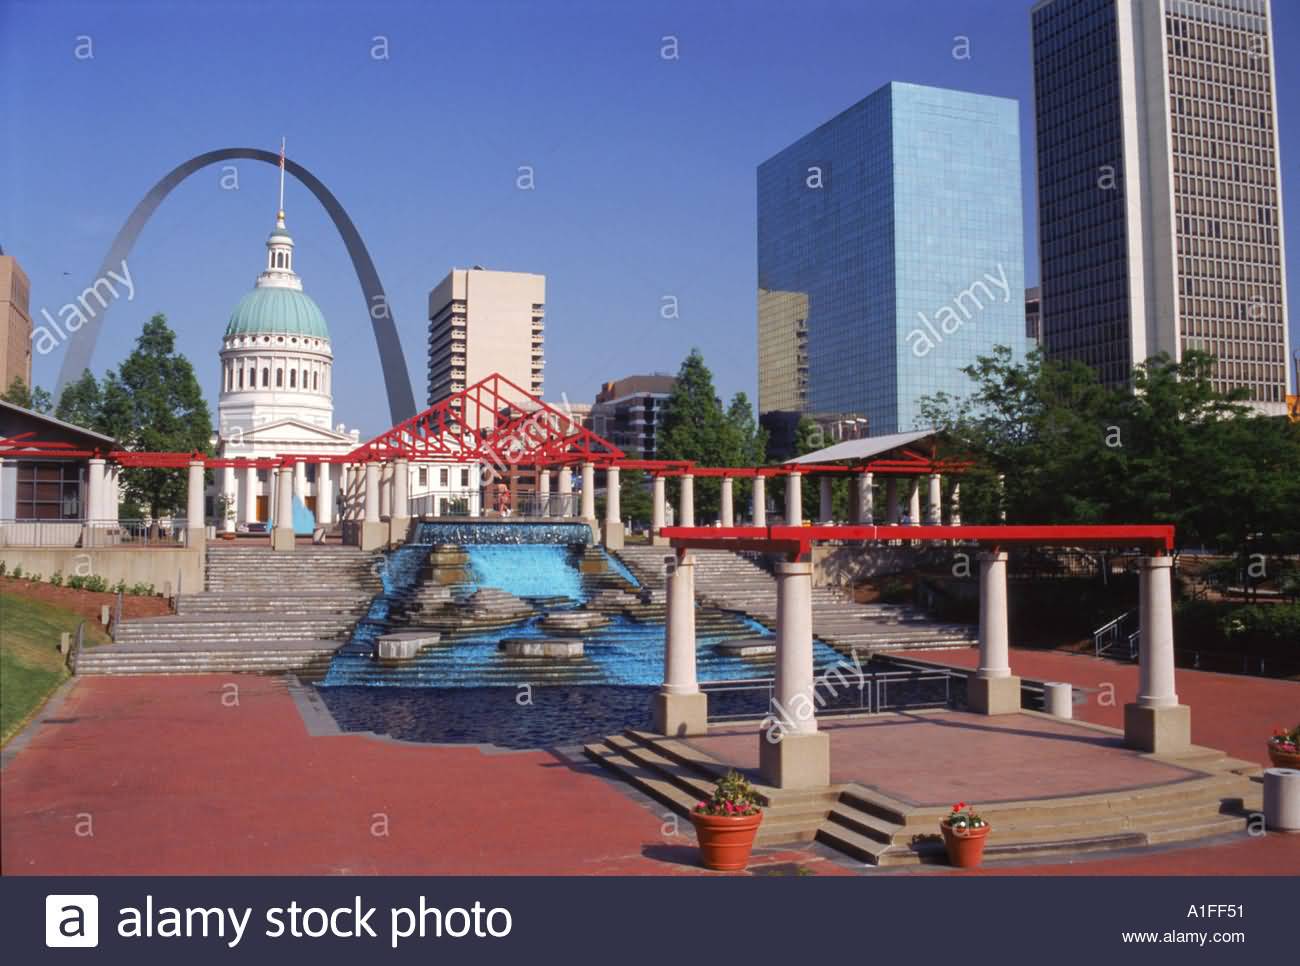 Modern Water Fountain With Old Courthouse And The Gateway Arch